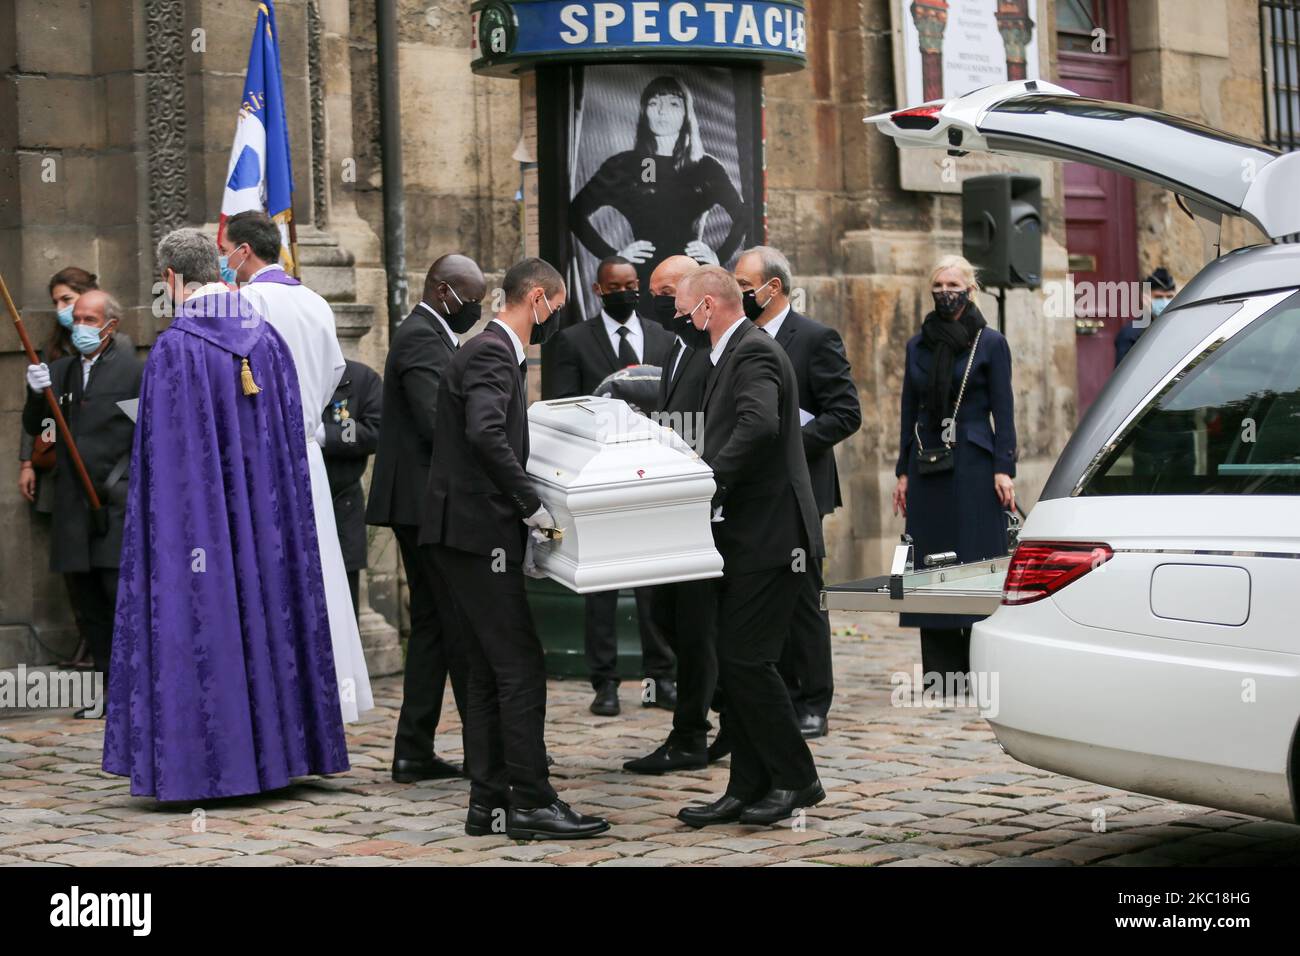 Pallbearers carry the coffin of French singer Juliette Greco during her funeral ceremony at the Saint-Germain-des-Pres church in Paris, on October 5, 2020. Legendary French singer Juliette Greco, whose career spanned over half a century, died aged 93, on 23 September 23. In the background, a mock-colonne Morris advertising column displays a poster of singer. (Photo by Michel Stoupak/NurPhoto) Stock Photo